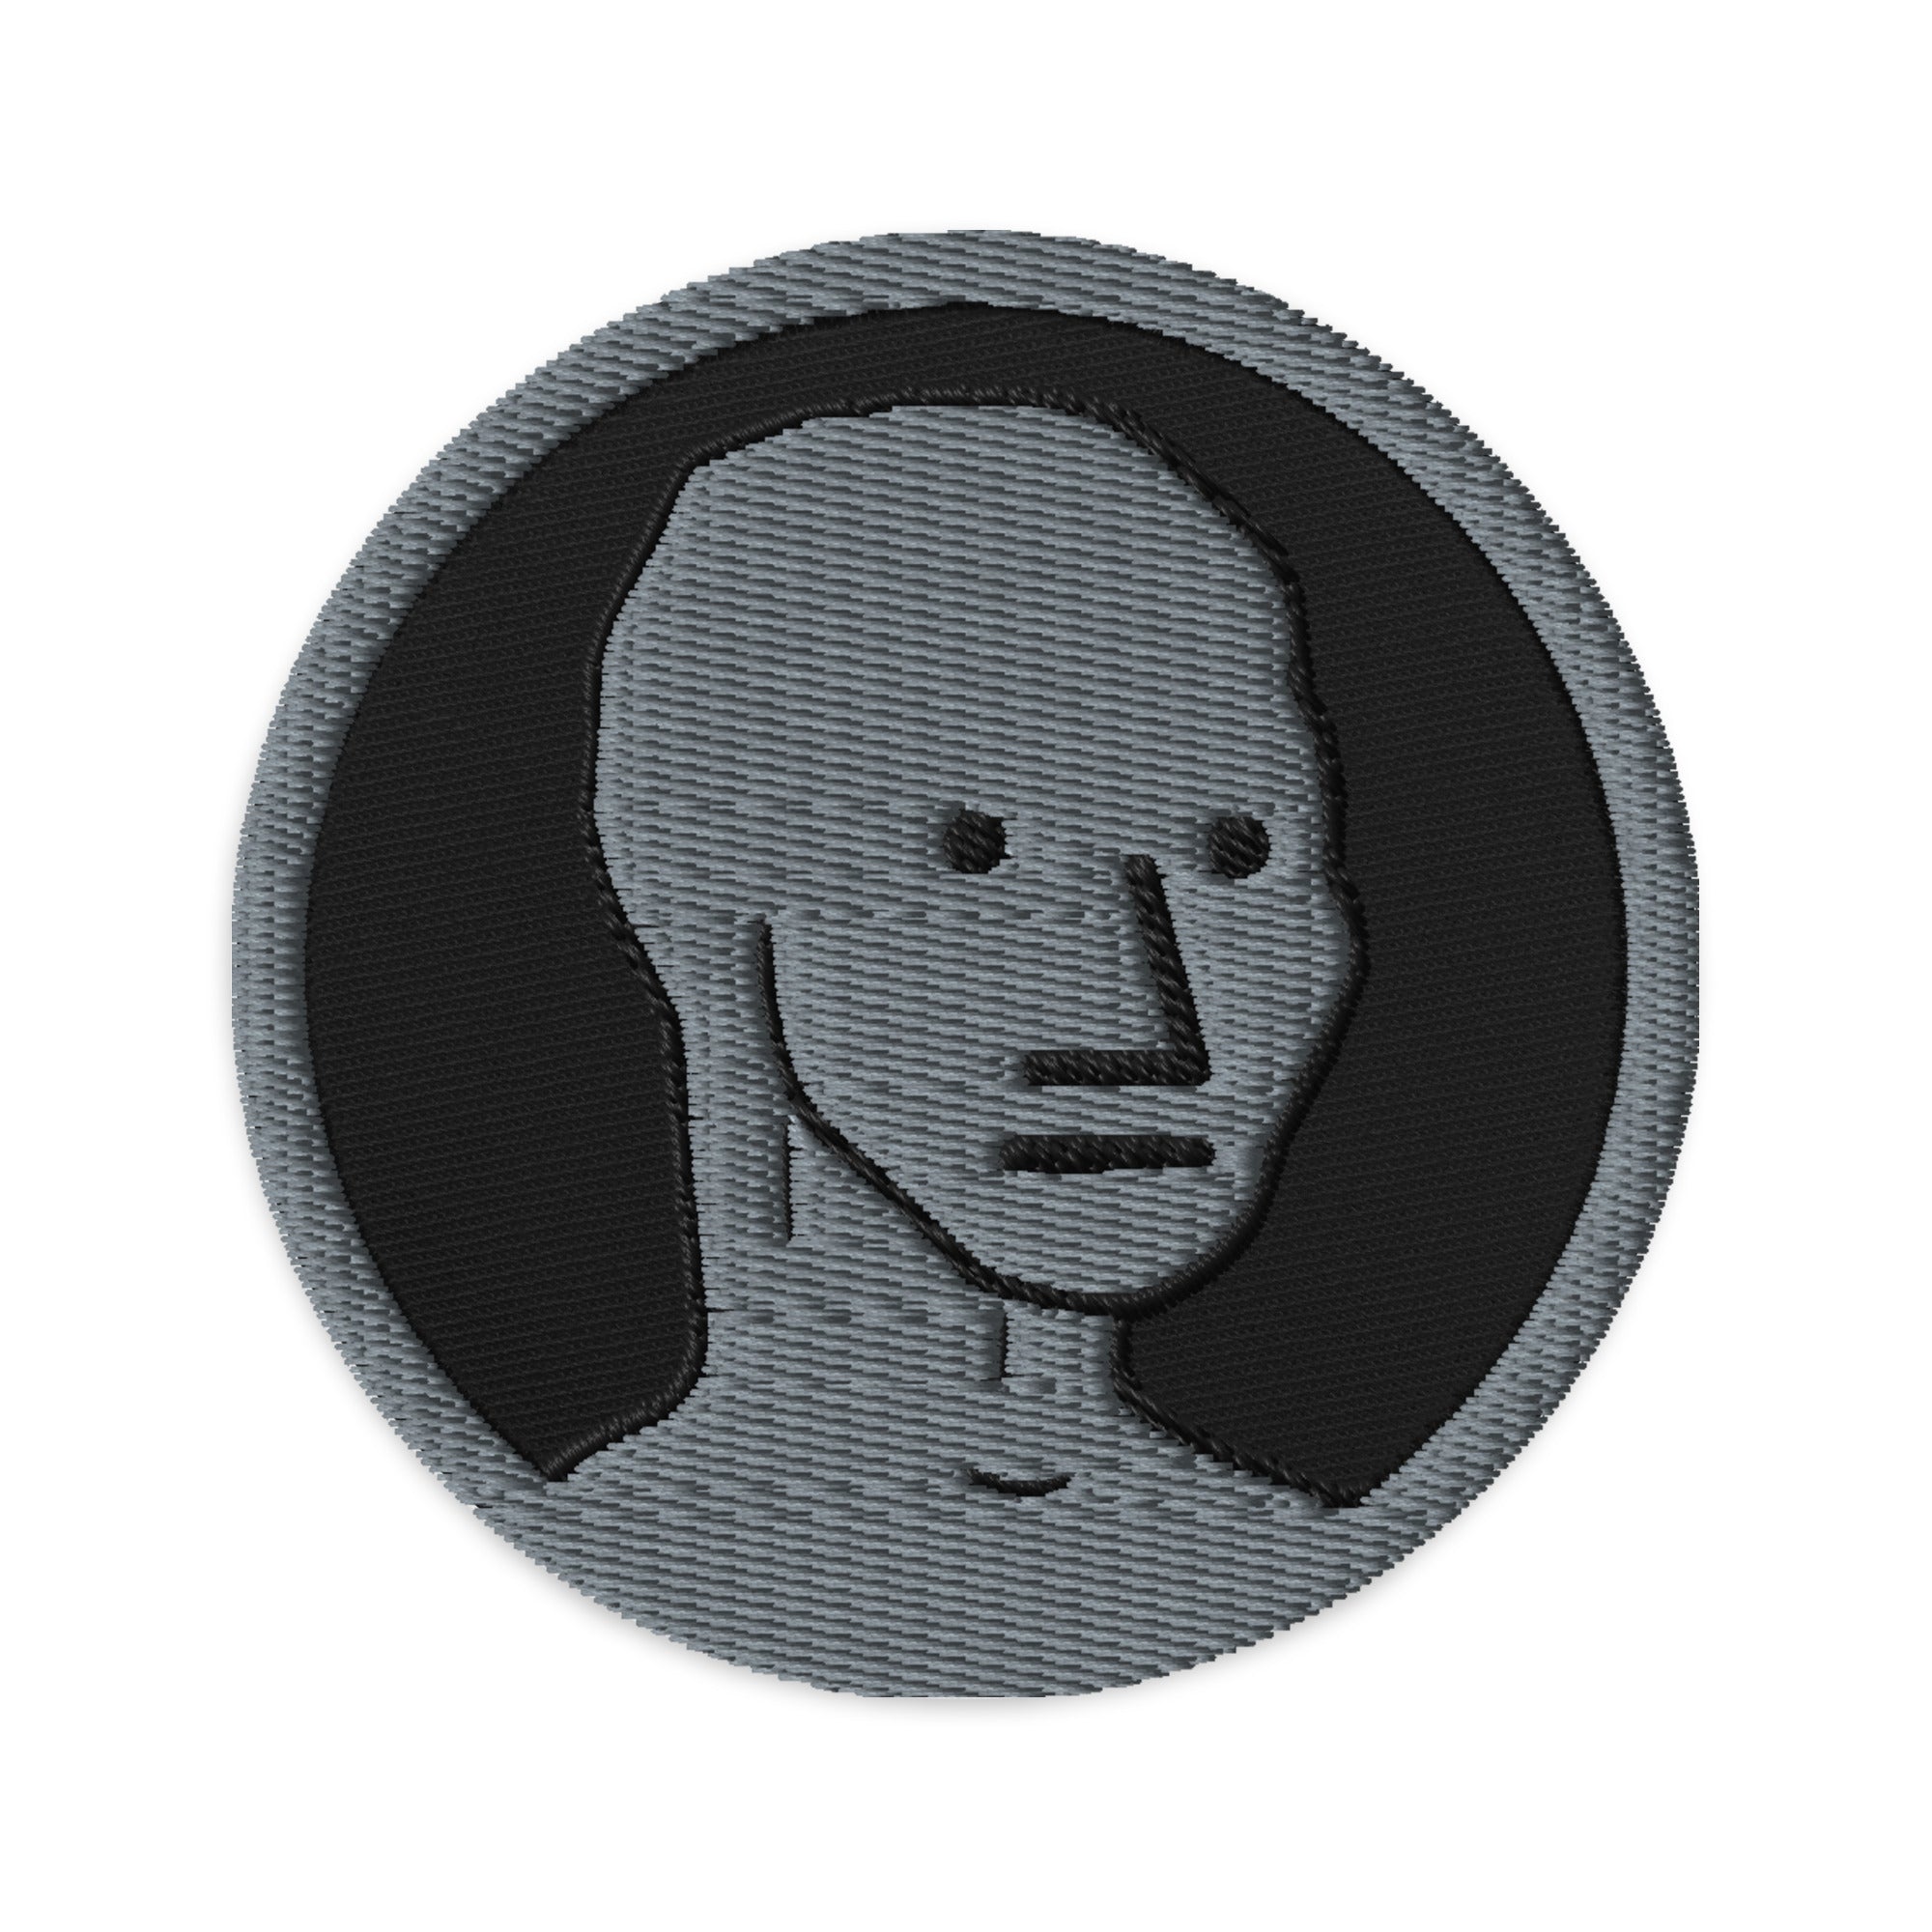 NPC Embroidered Patch